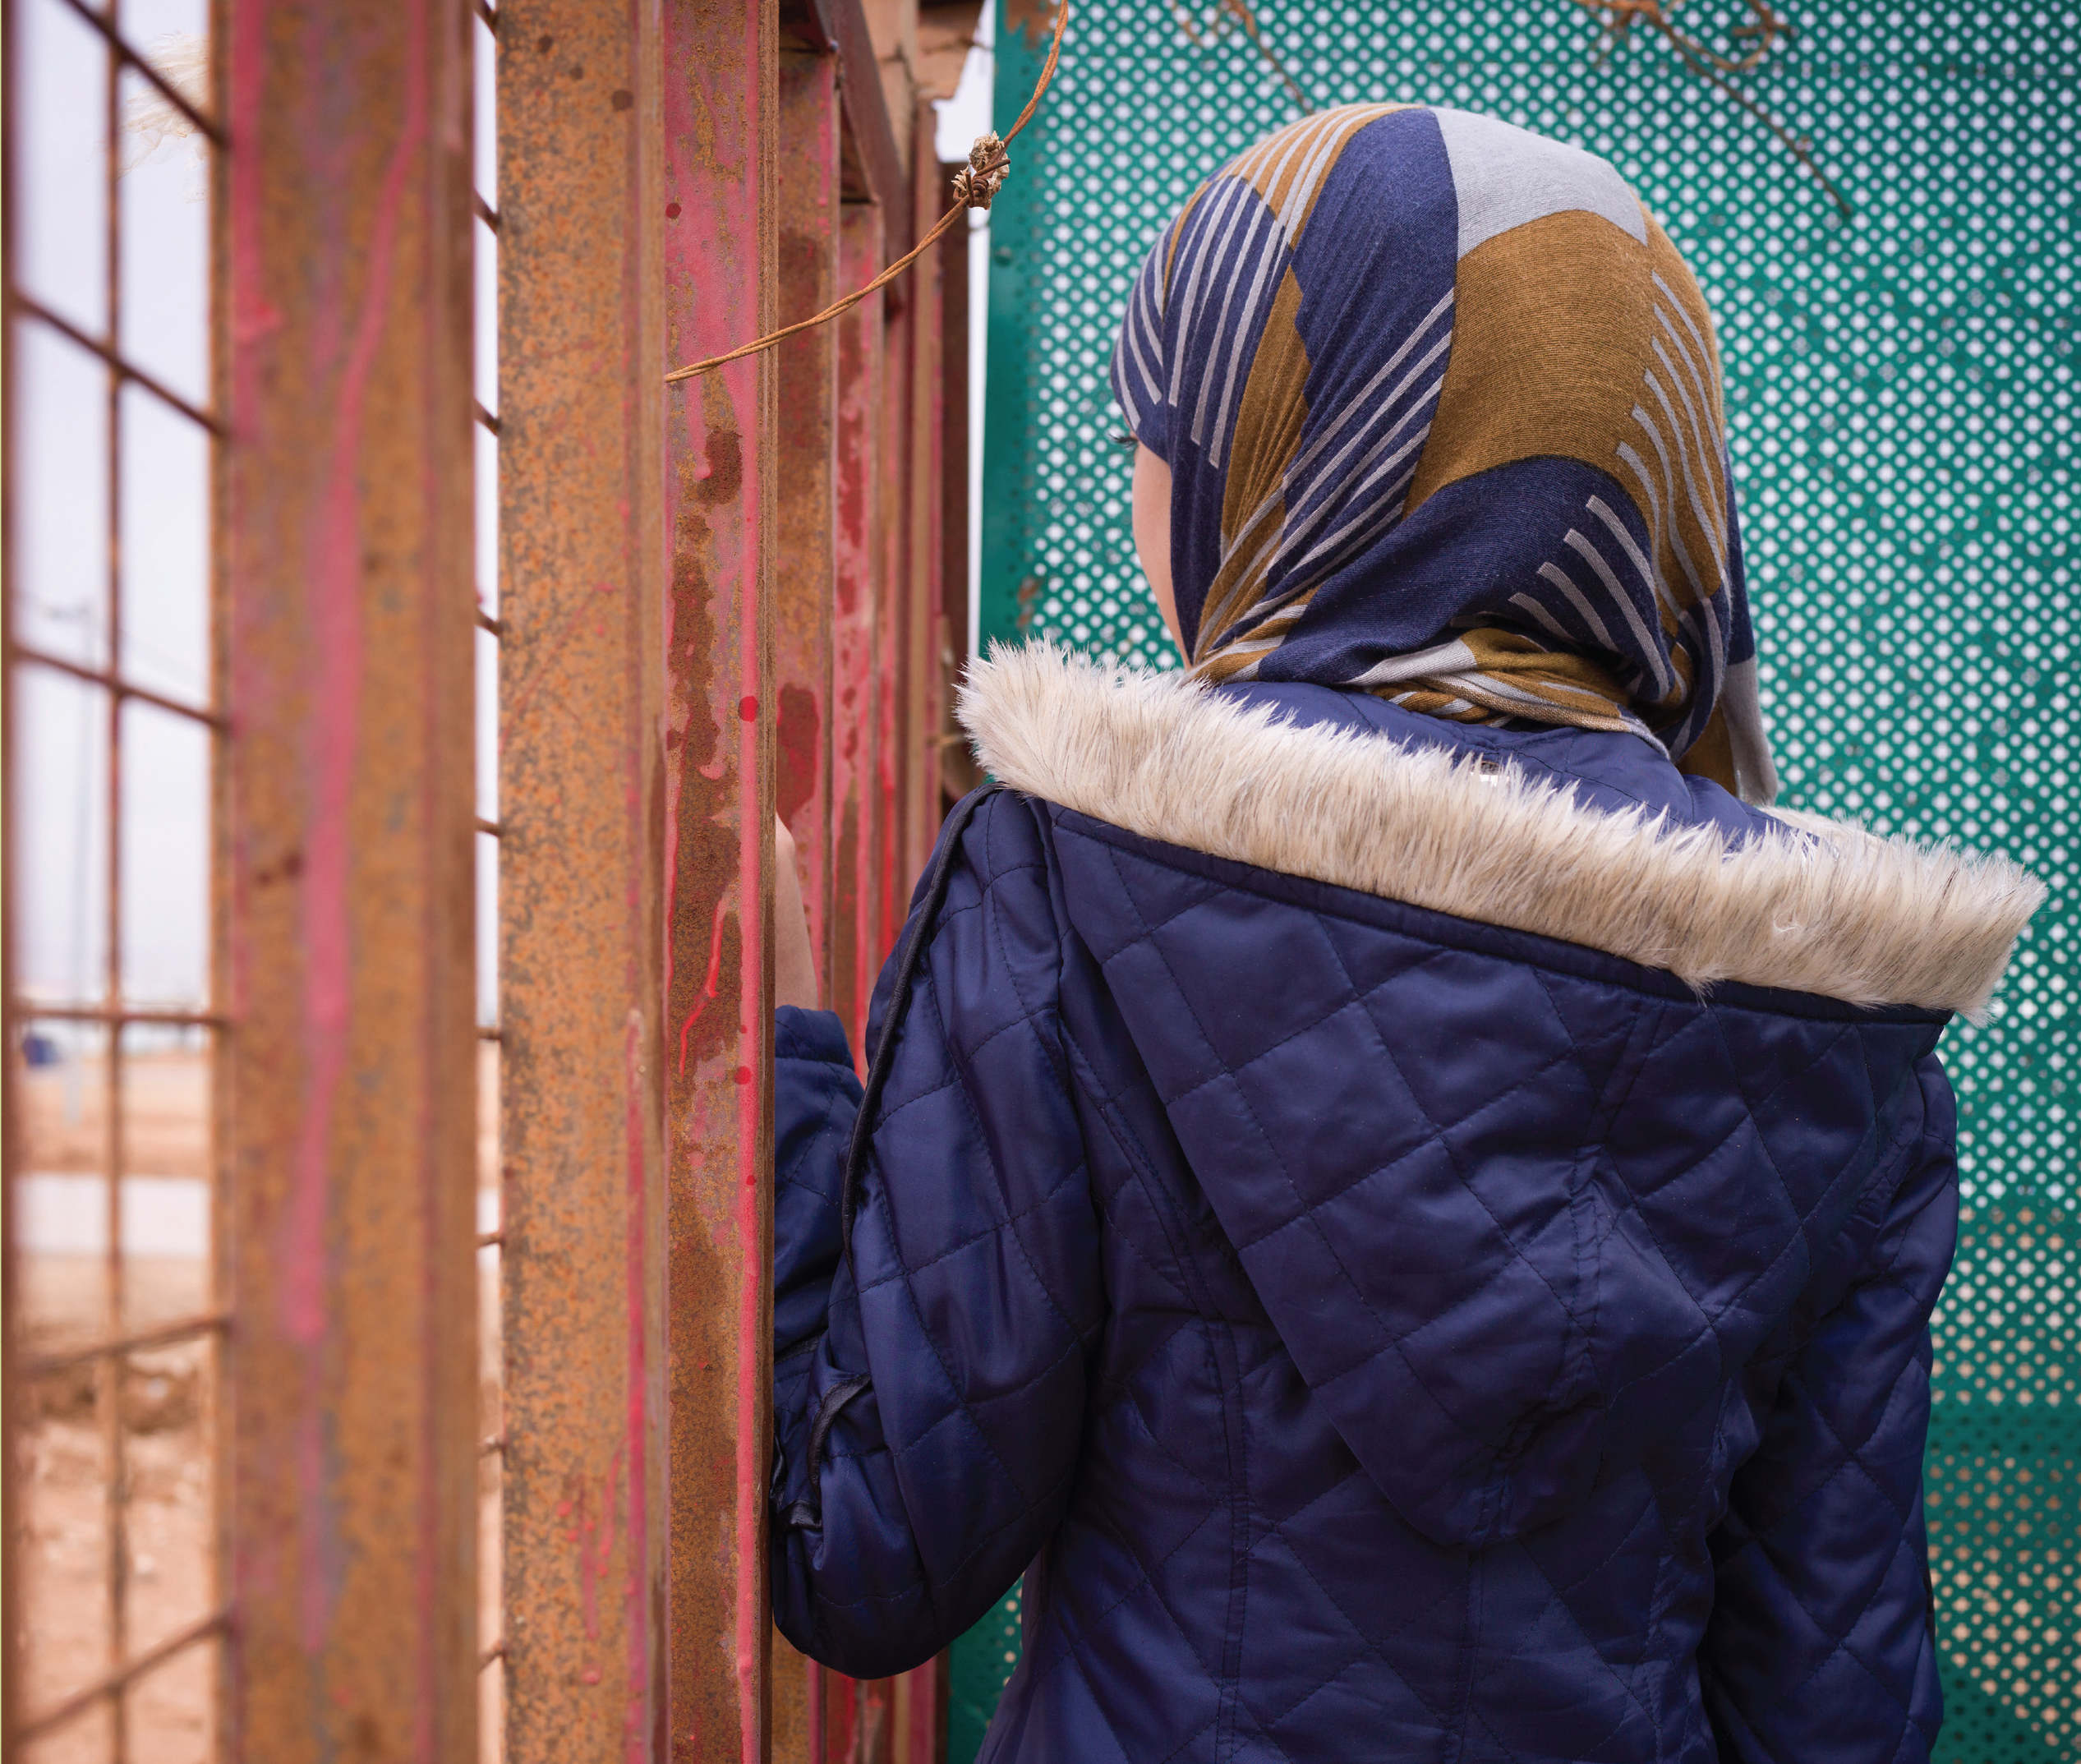 A girl in a multicolored hijab looks away from the camera.